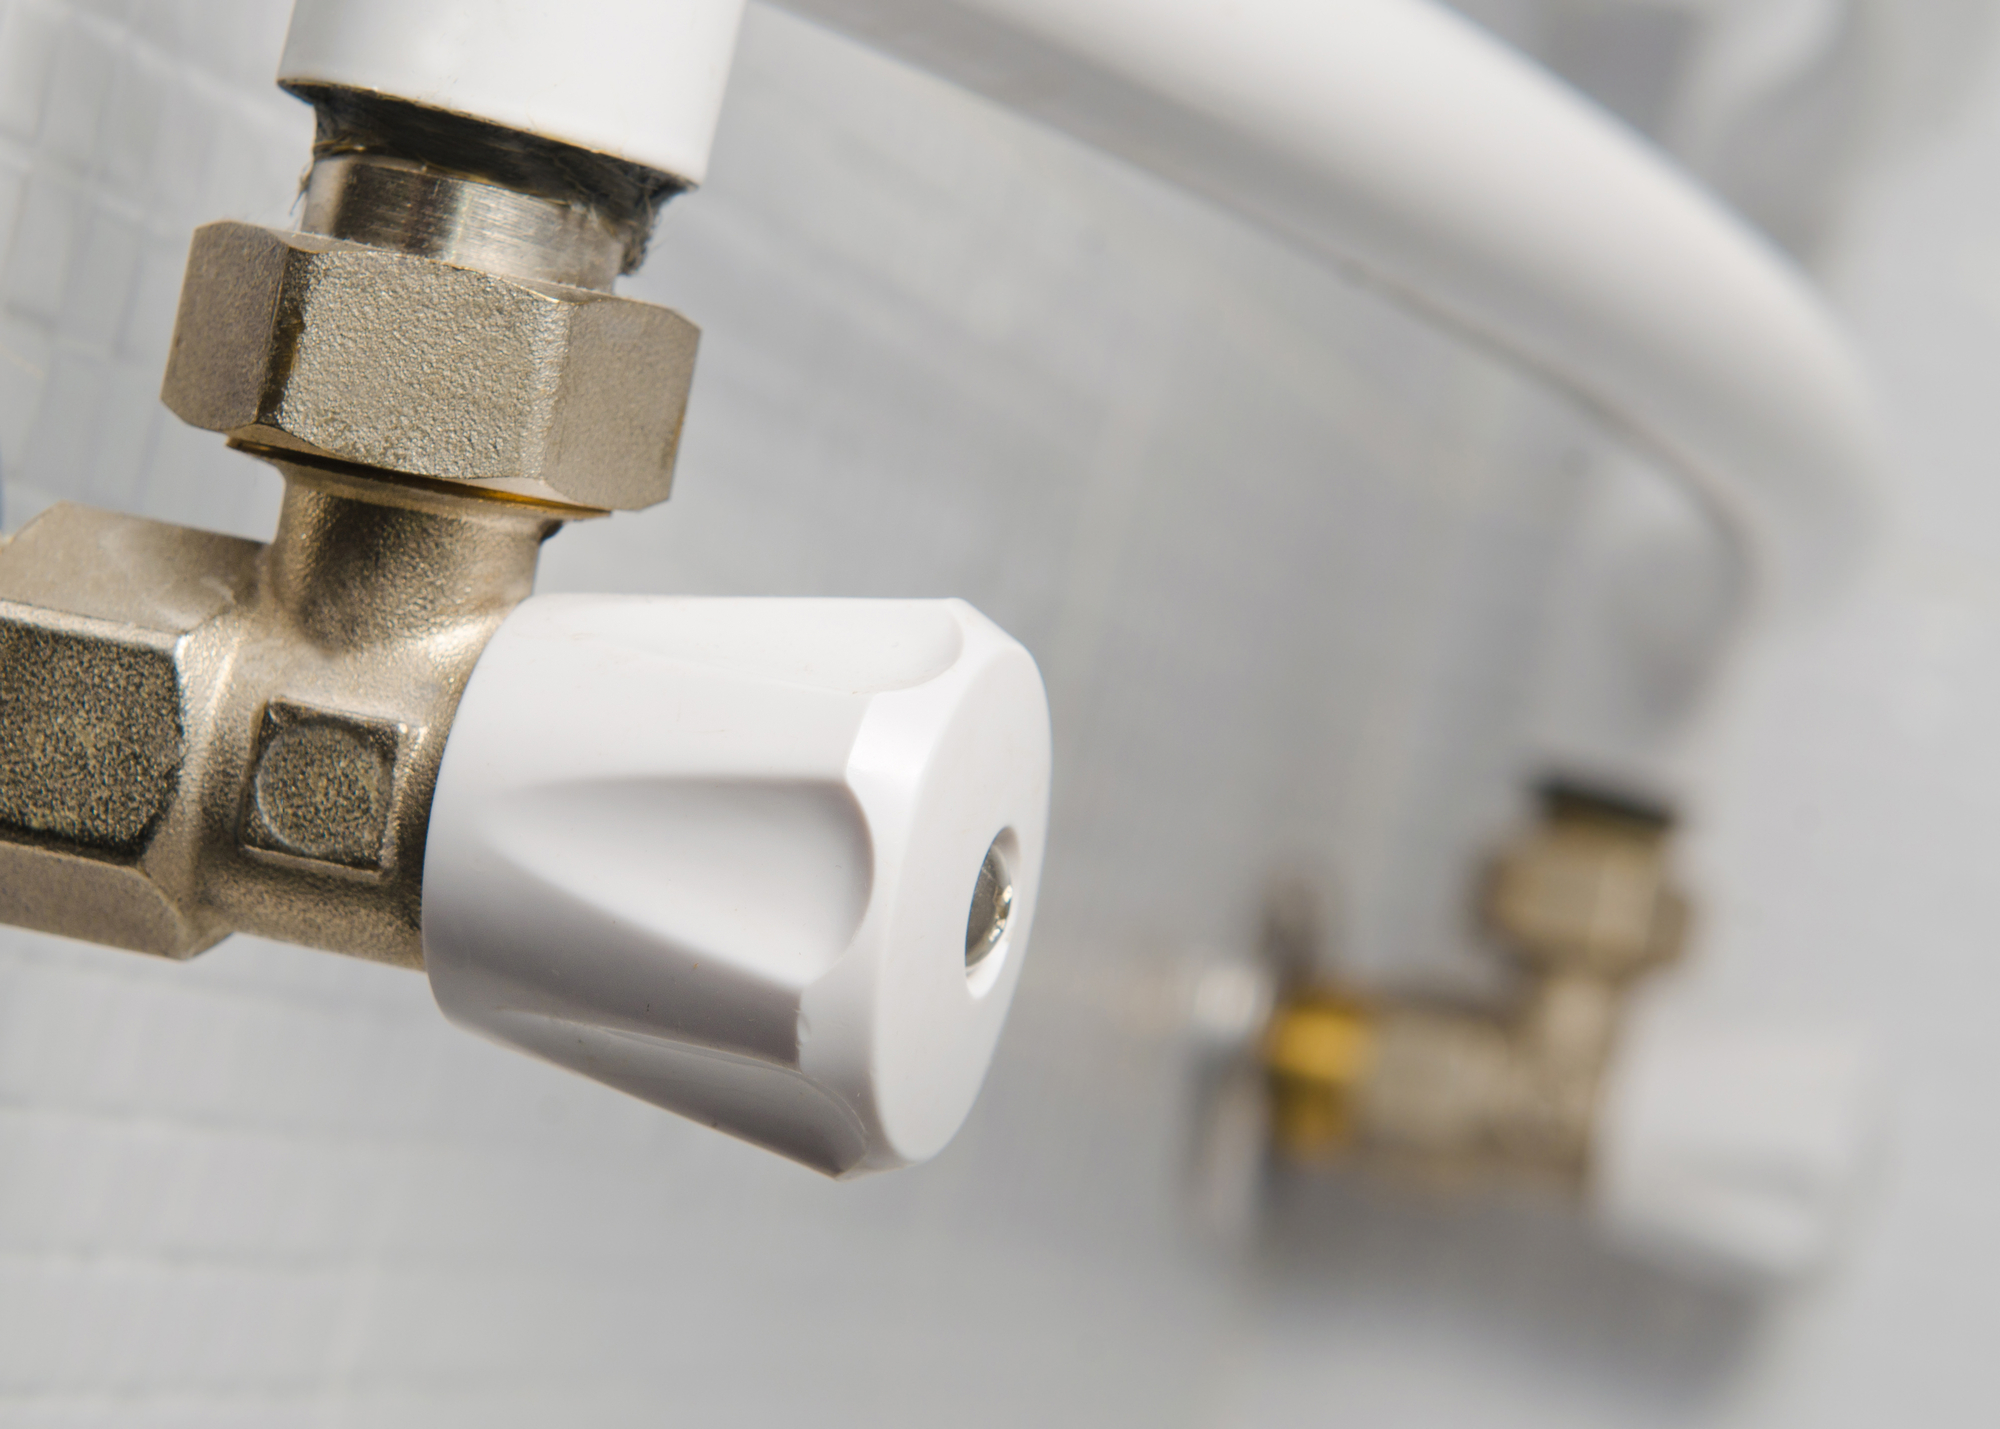 What Plumbing Work Can Be Done Without A License In NYC